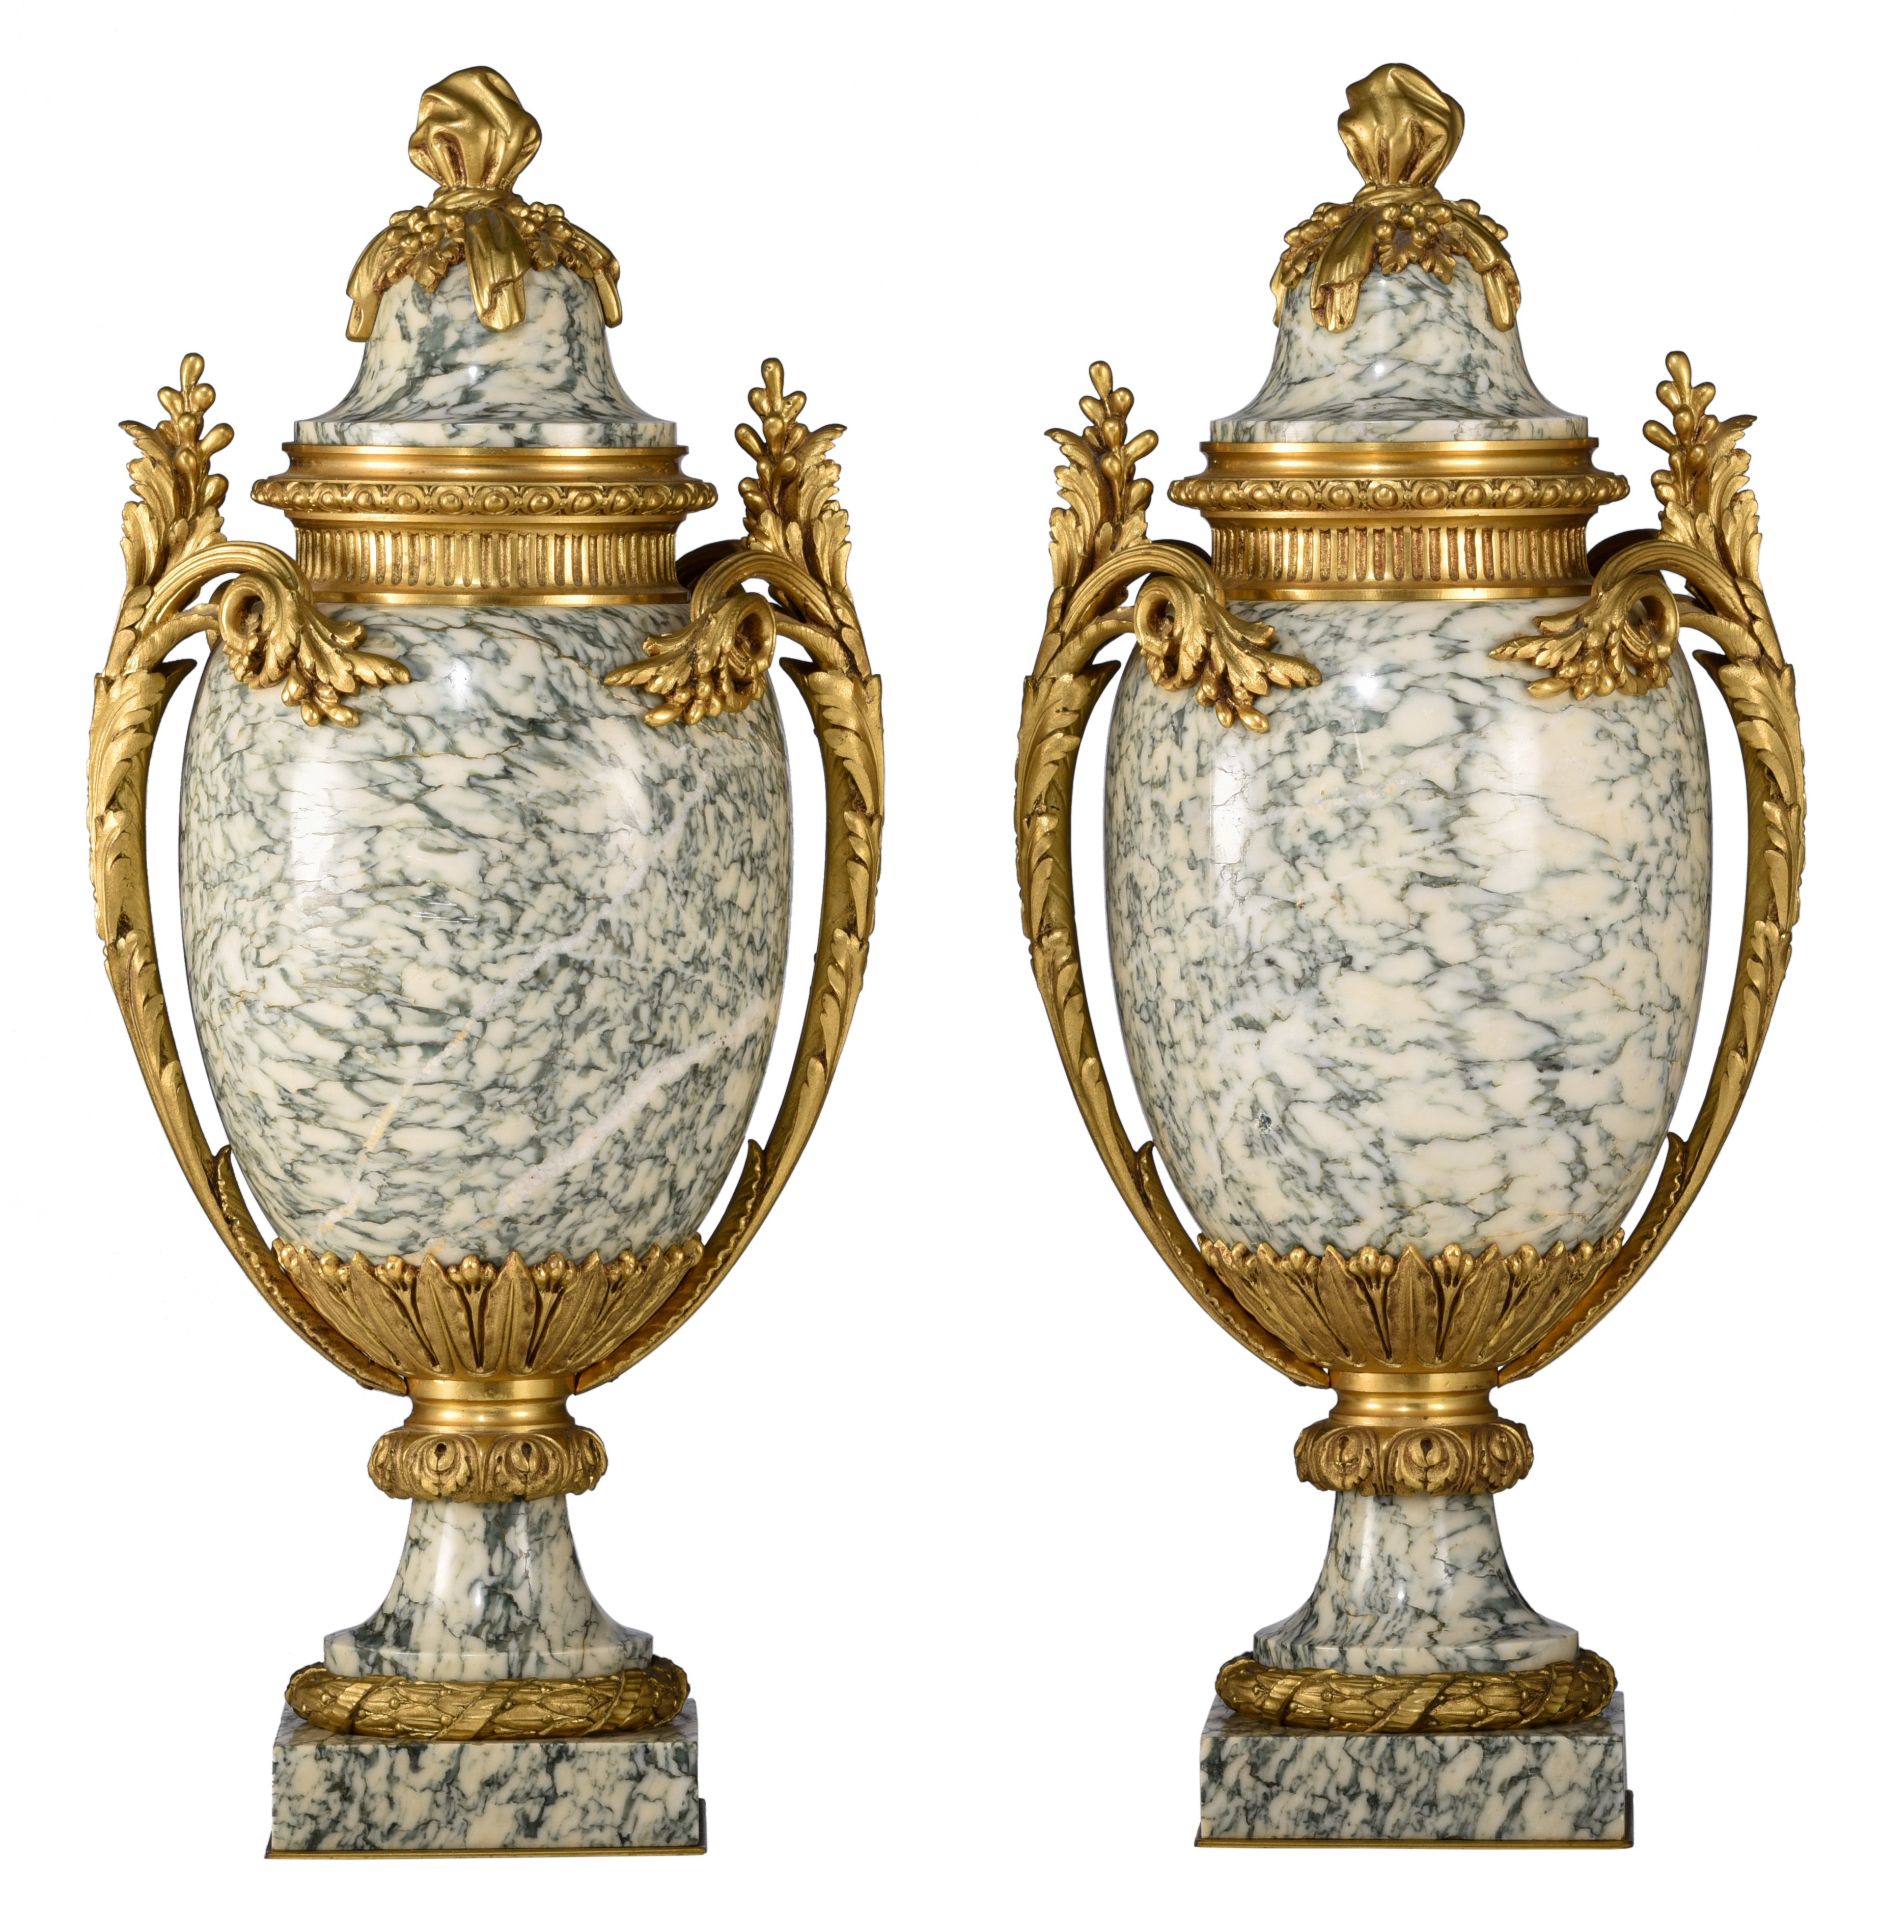 (BIDDING ONLY ON CARLOBONTE.BE) A fine pair of Neoclassical marble and gilt bronze cassolettes, H 50